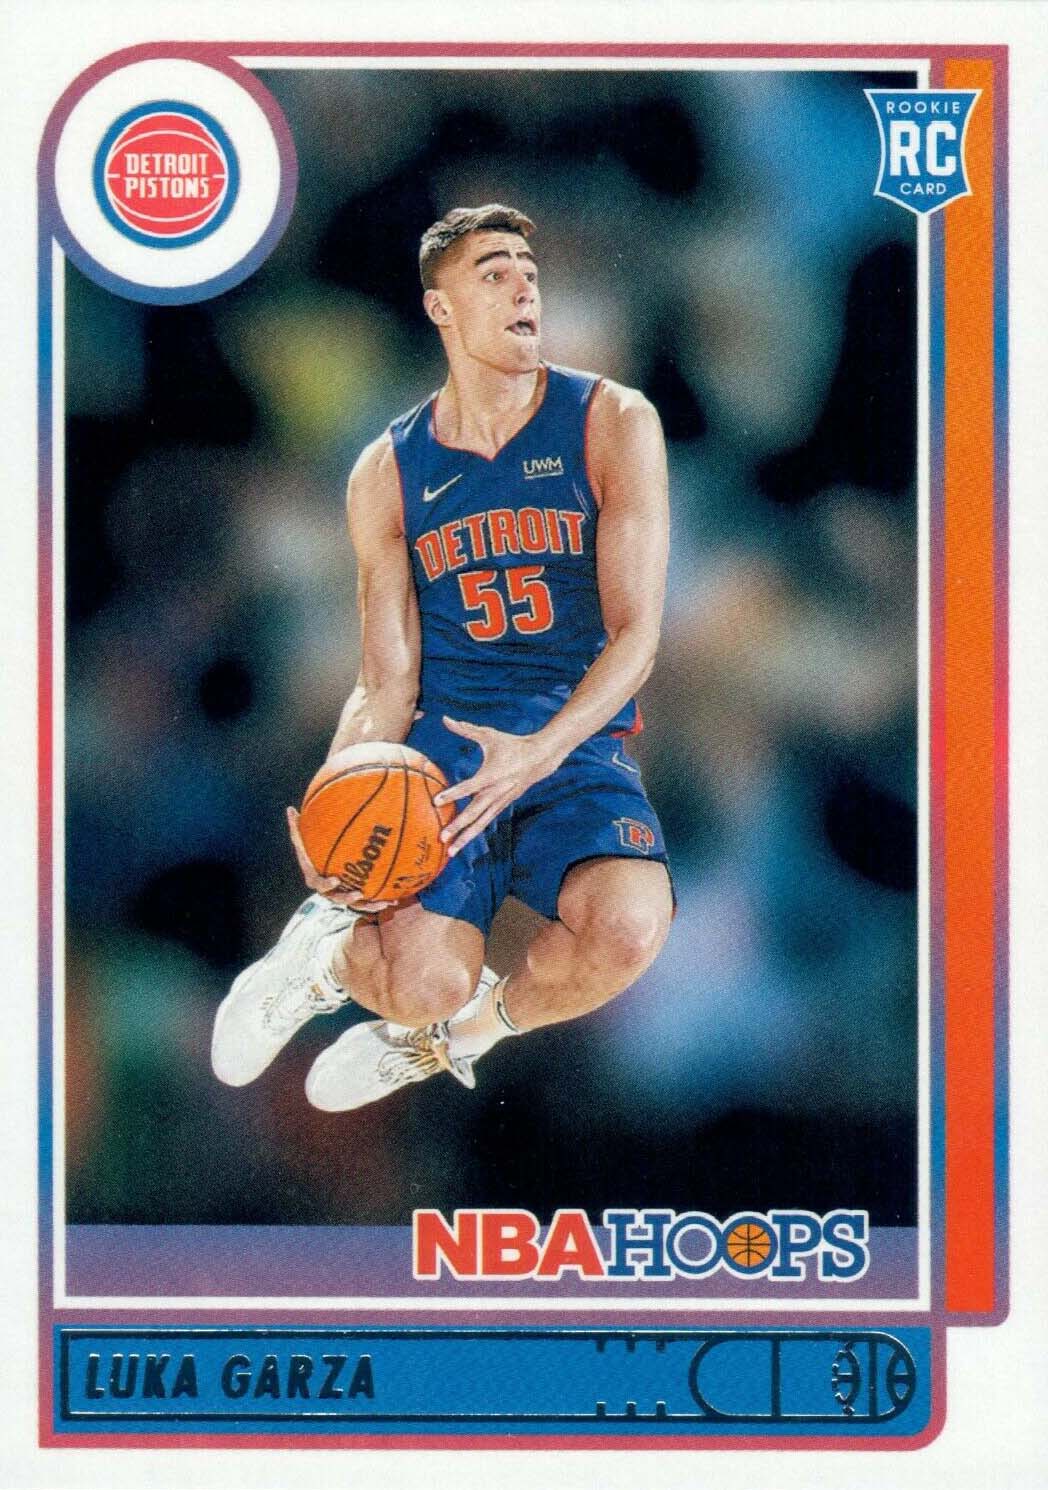 Detroit Pistons 2021 2022 Hoops Factory Sealed Team Set with Rookie Cards of Cade Cunningham, Isaiah Livers and Luka Garza